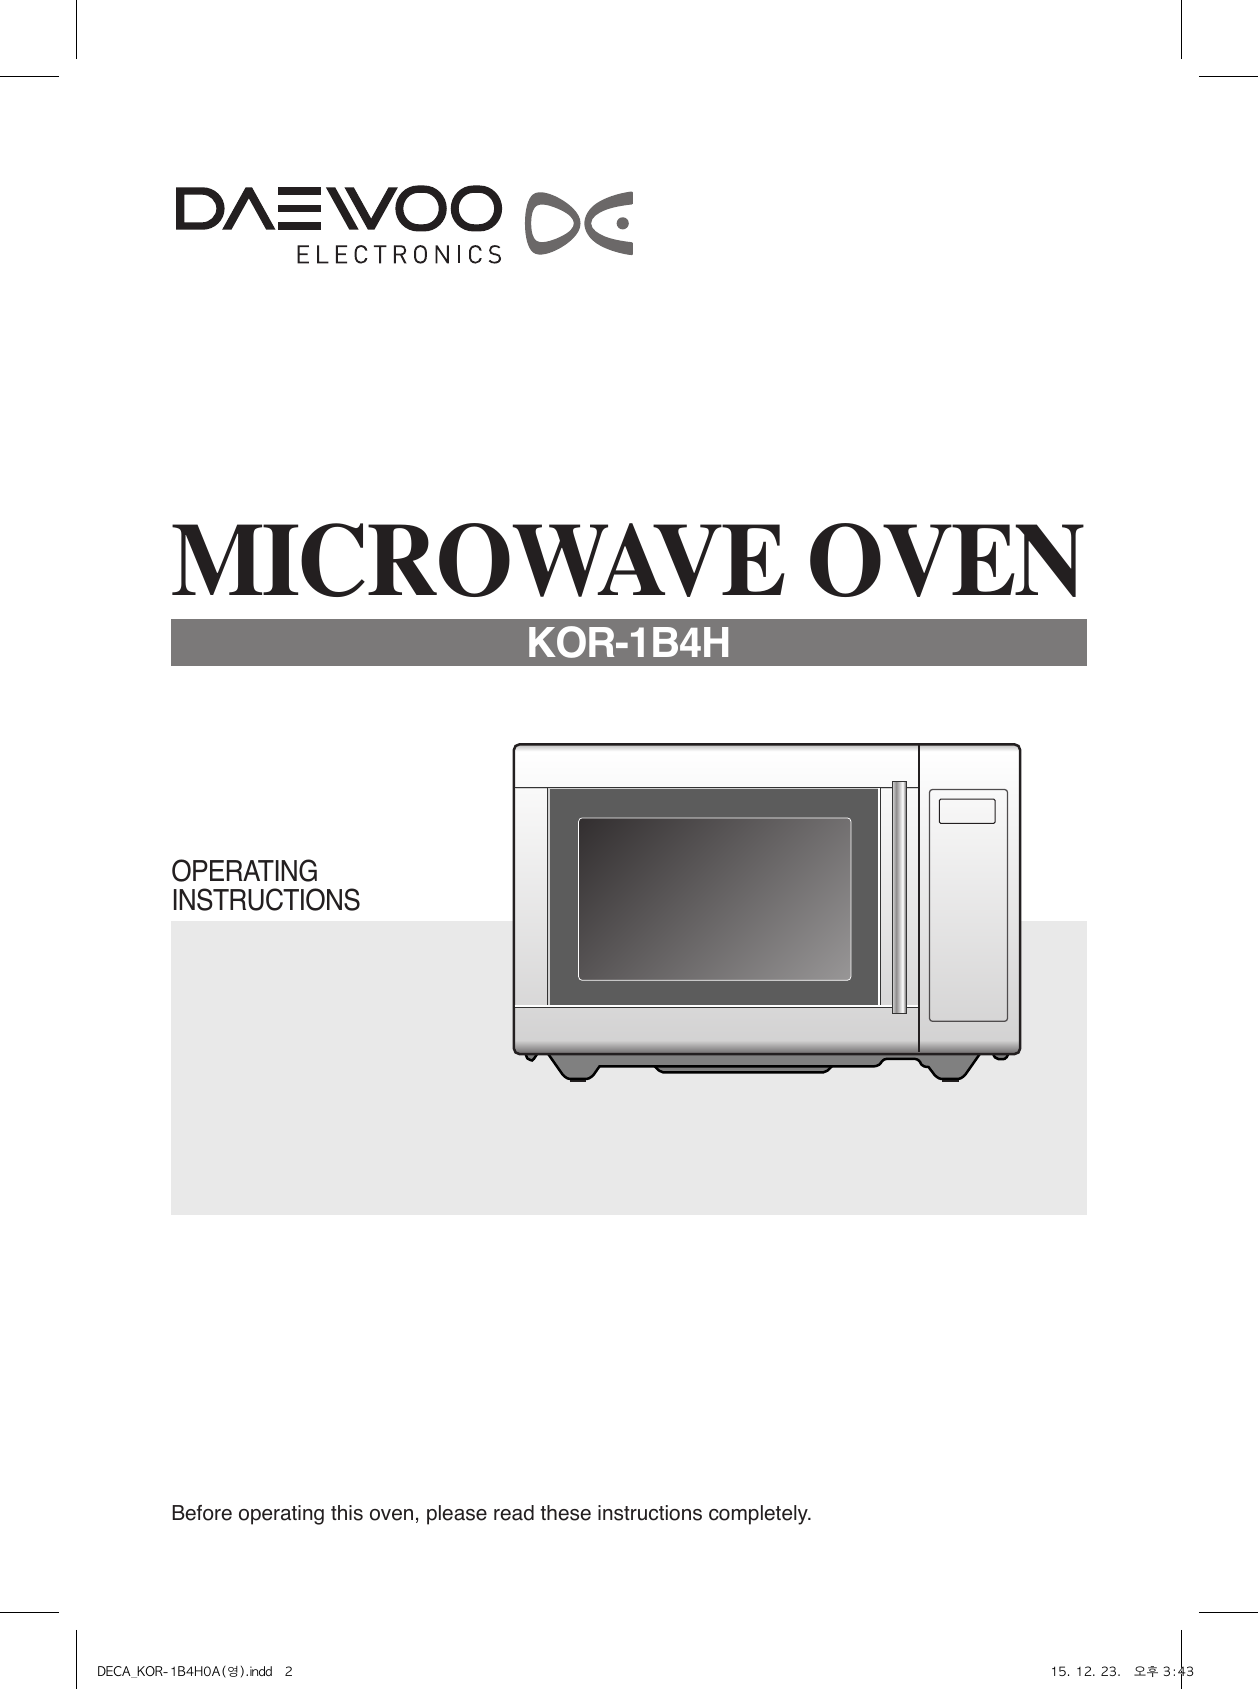 Before operating this oven, please read these instructions completely.OPERATINGINSTRUCTIONSMICROWAVE OVENKOR-1B4HDECA_KOR-1B4H0A(영).indd   2 15. 12. 23.   오후 3:43